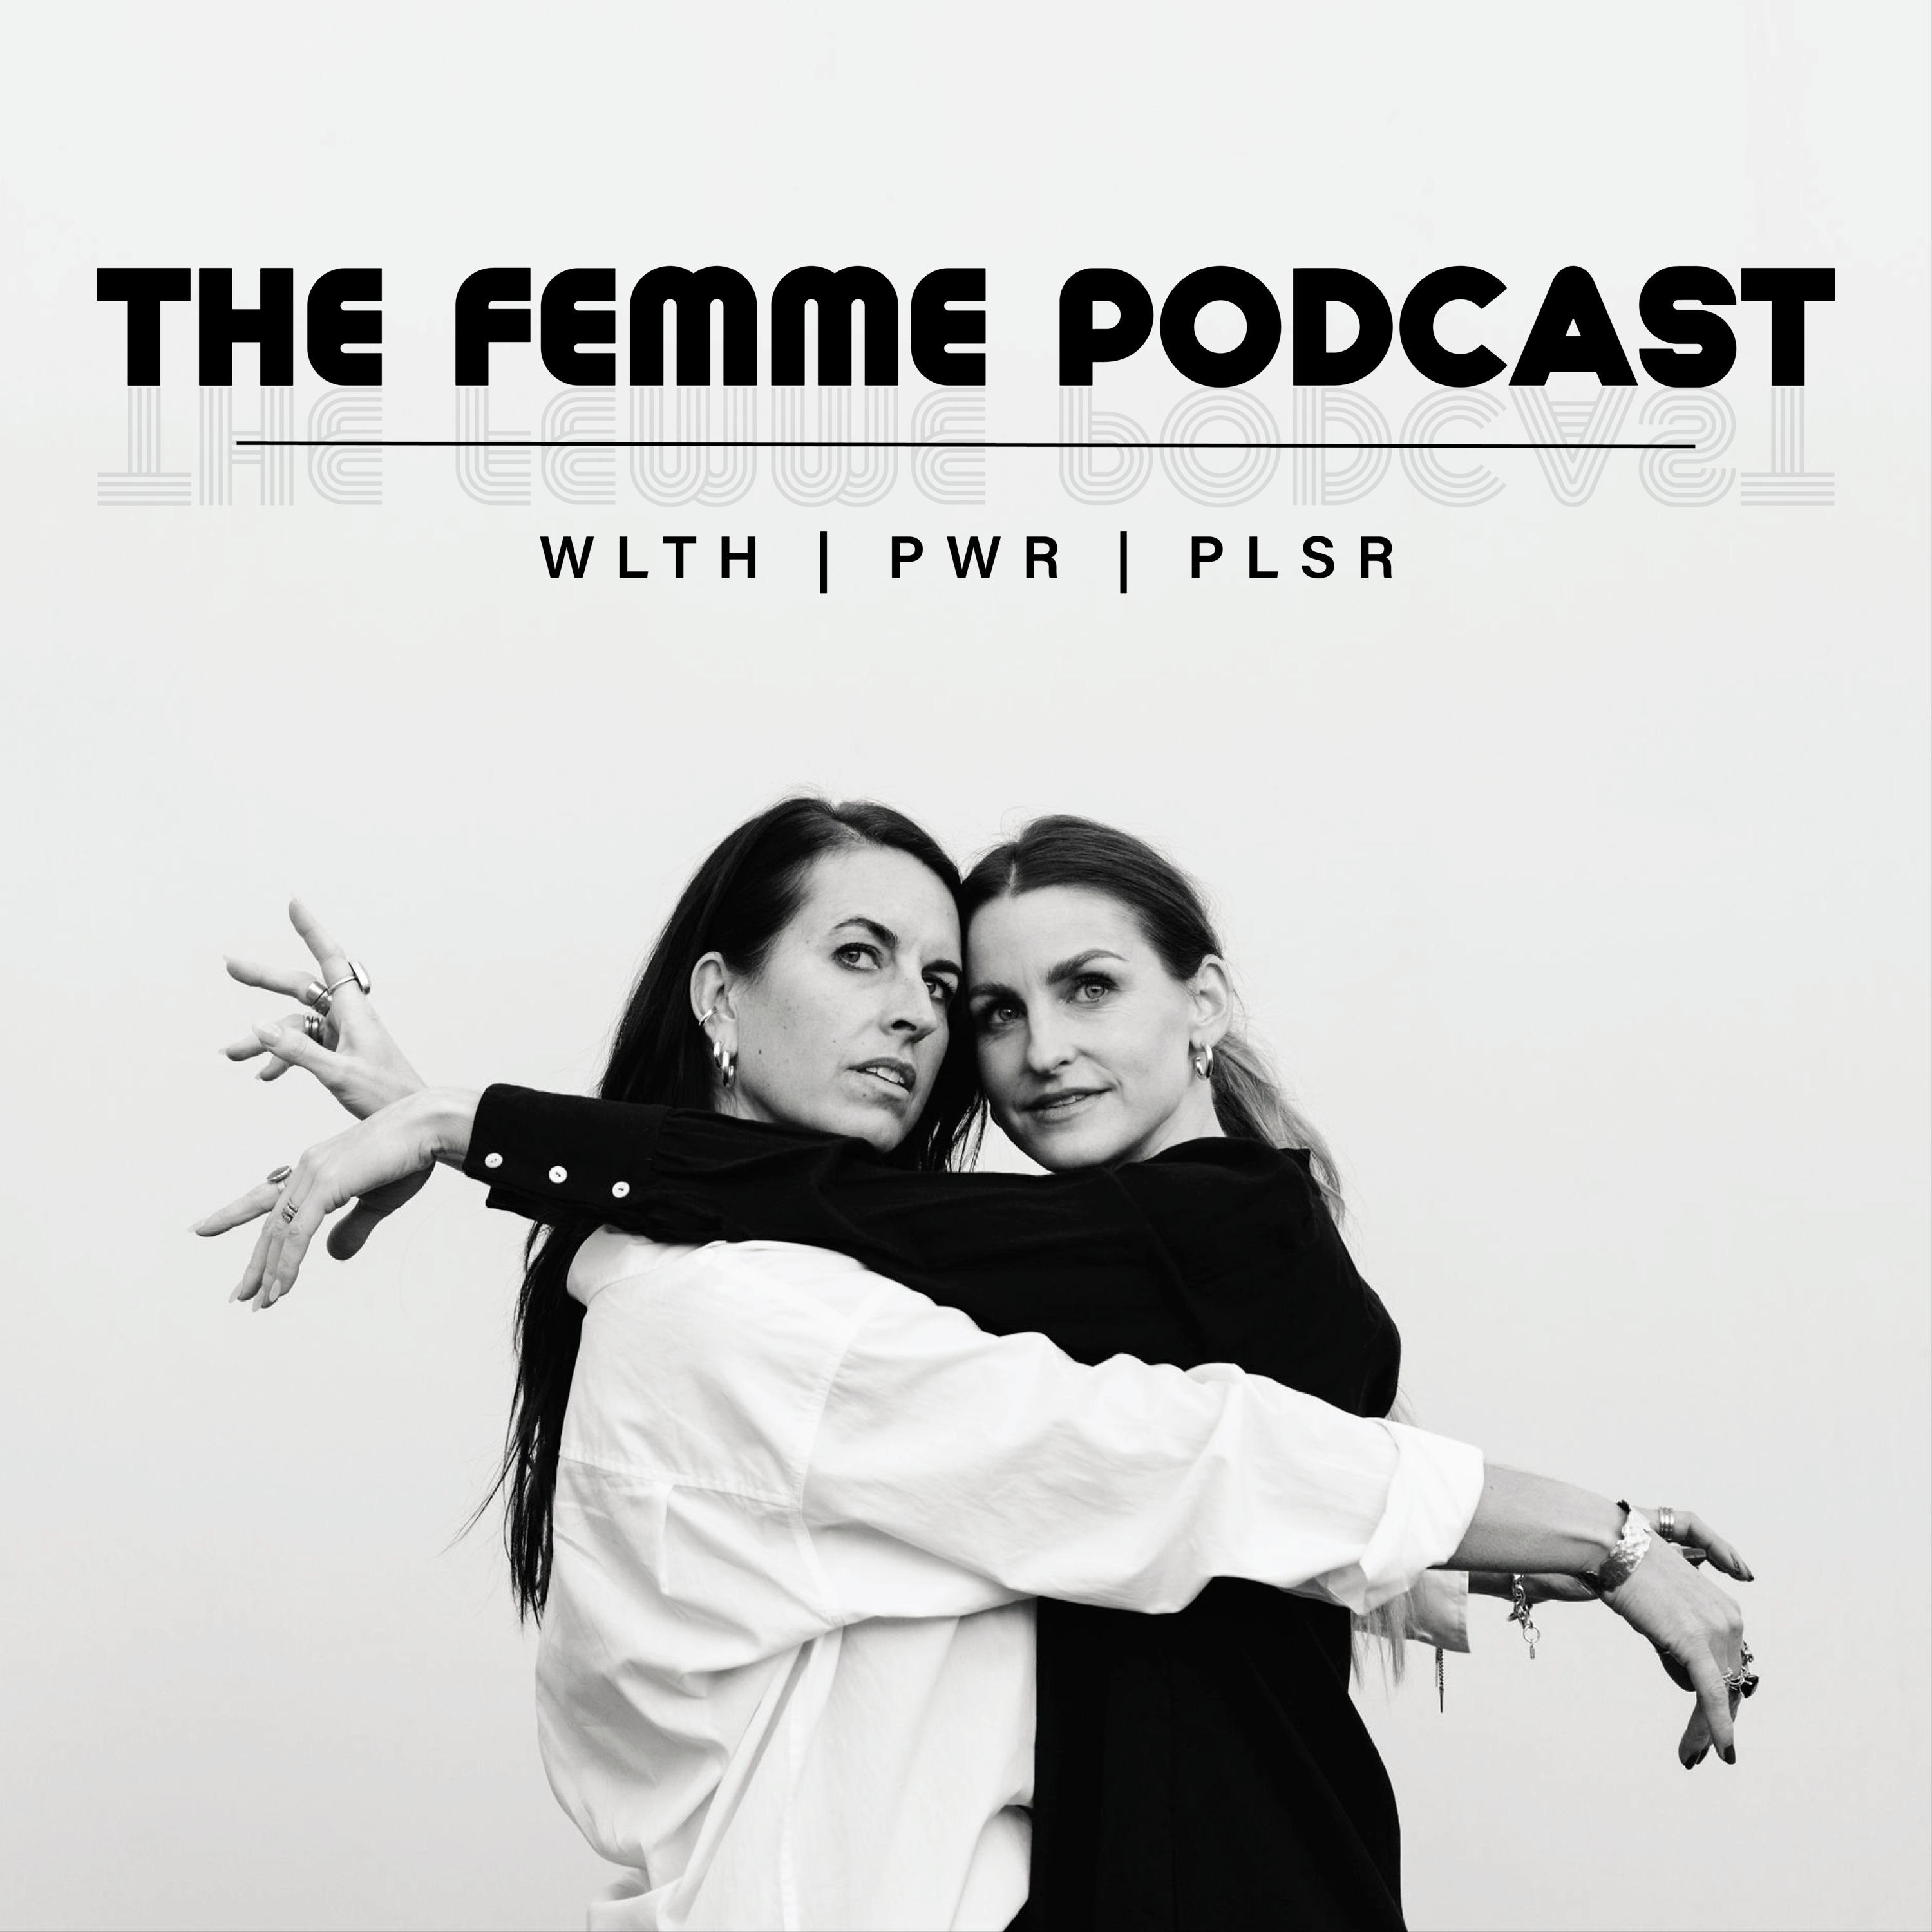 The Femme Podcast